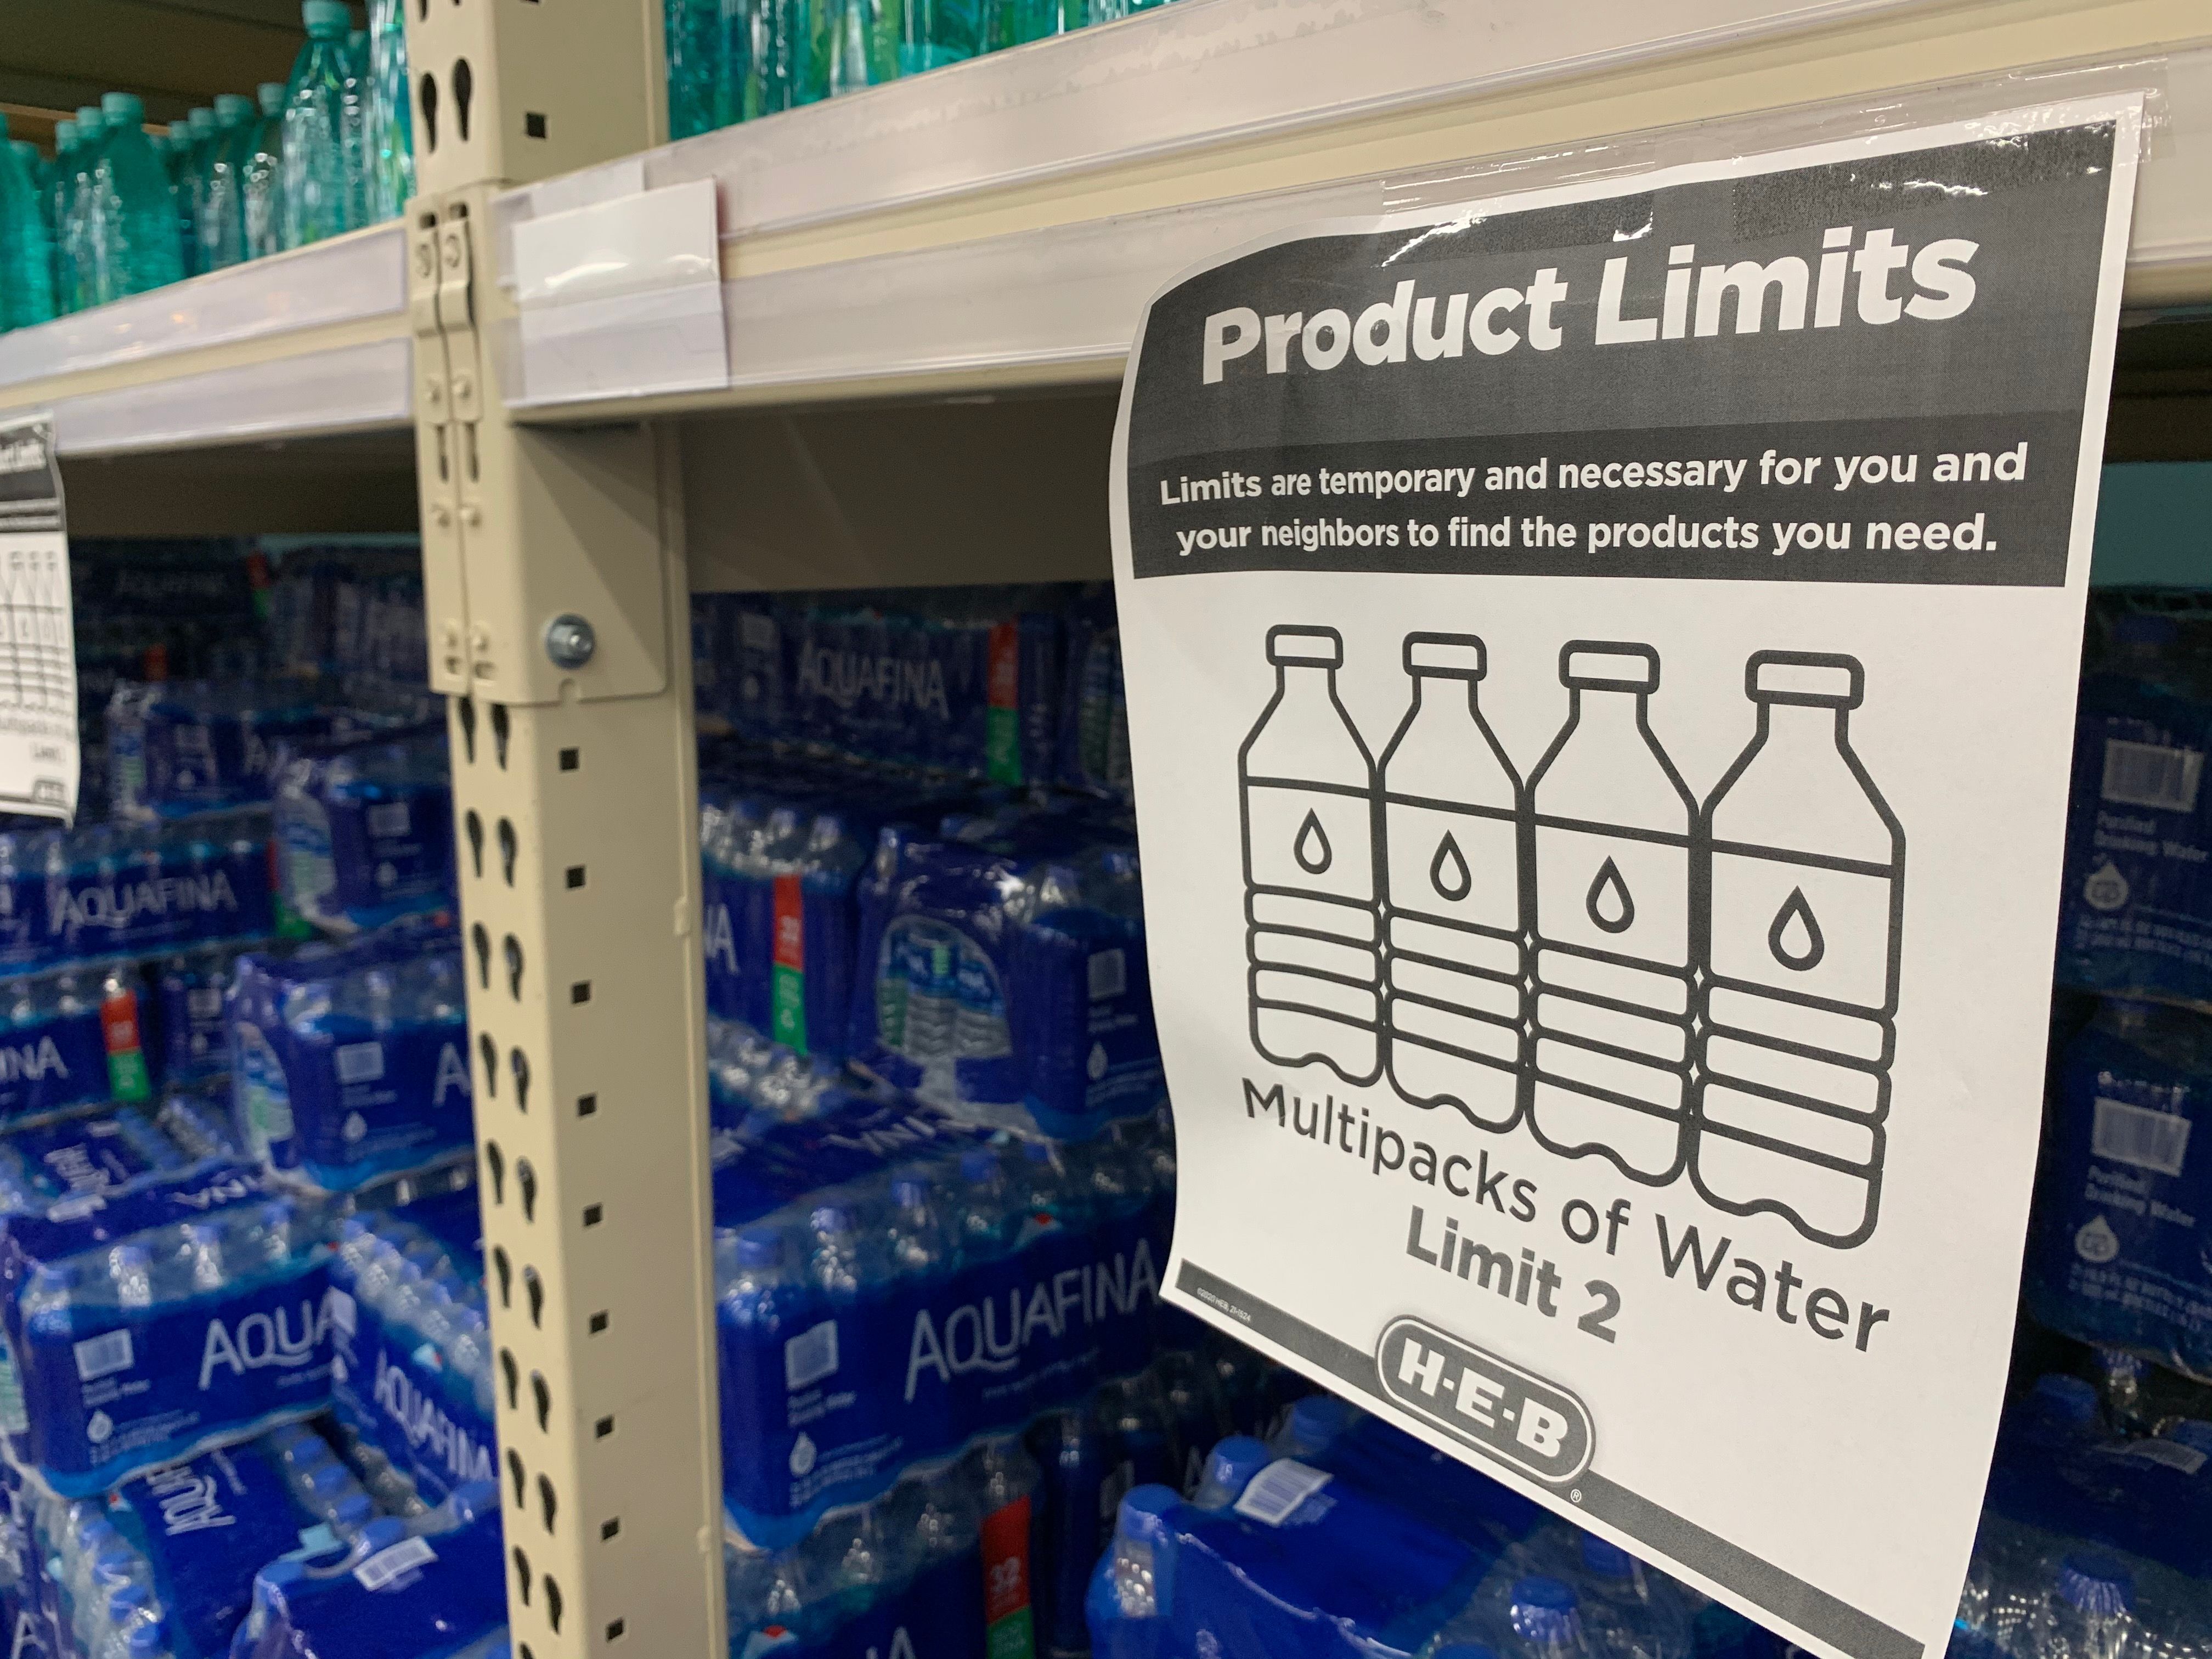 A sign attached to a shelf in front of packs of water reads "product limits. Multipacks of water limit 2"